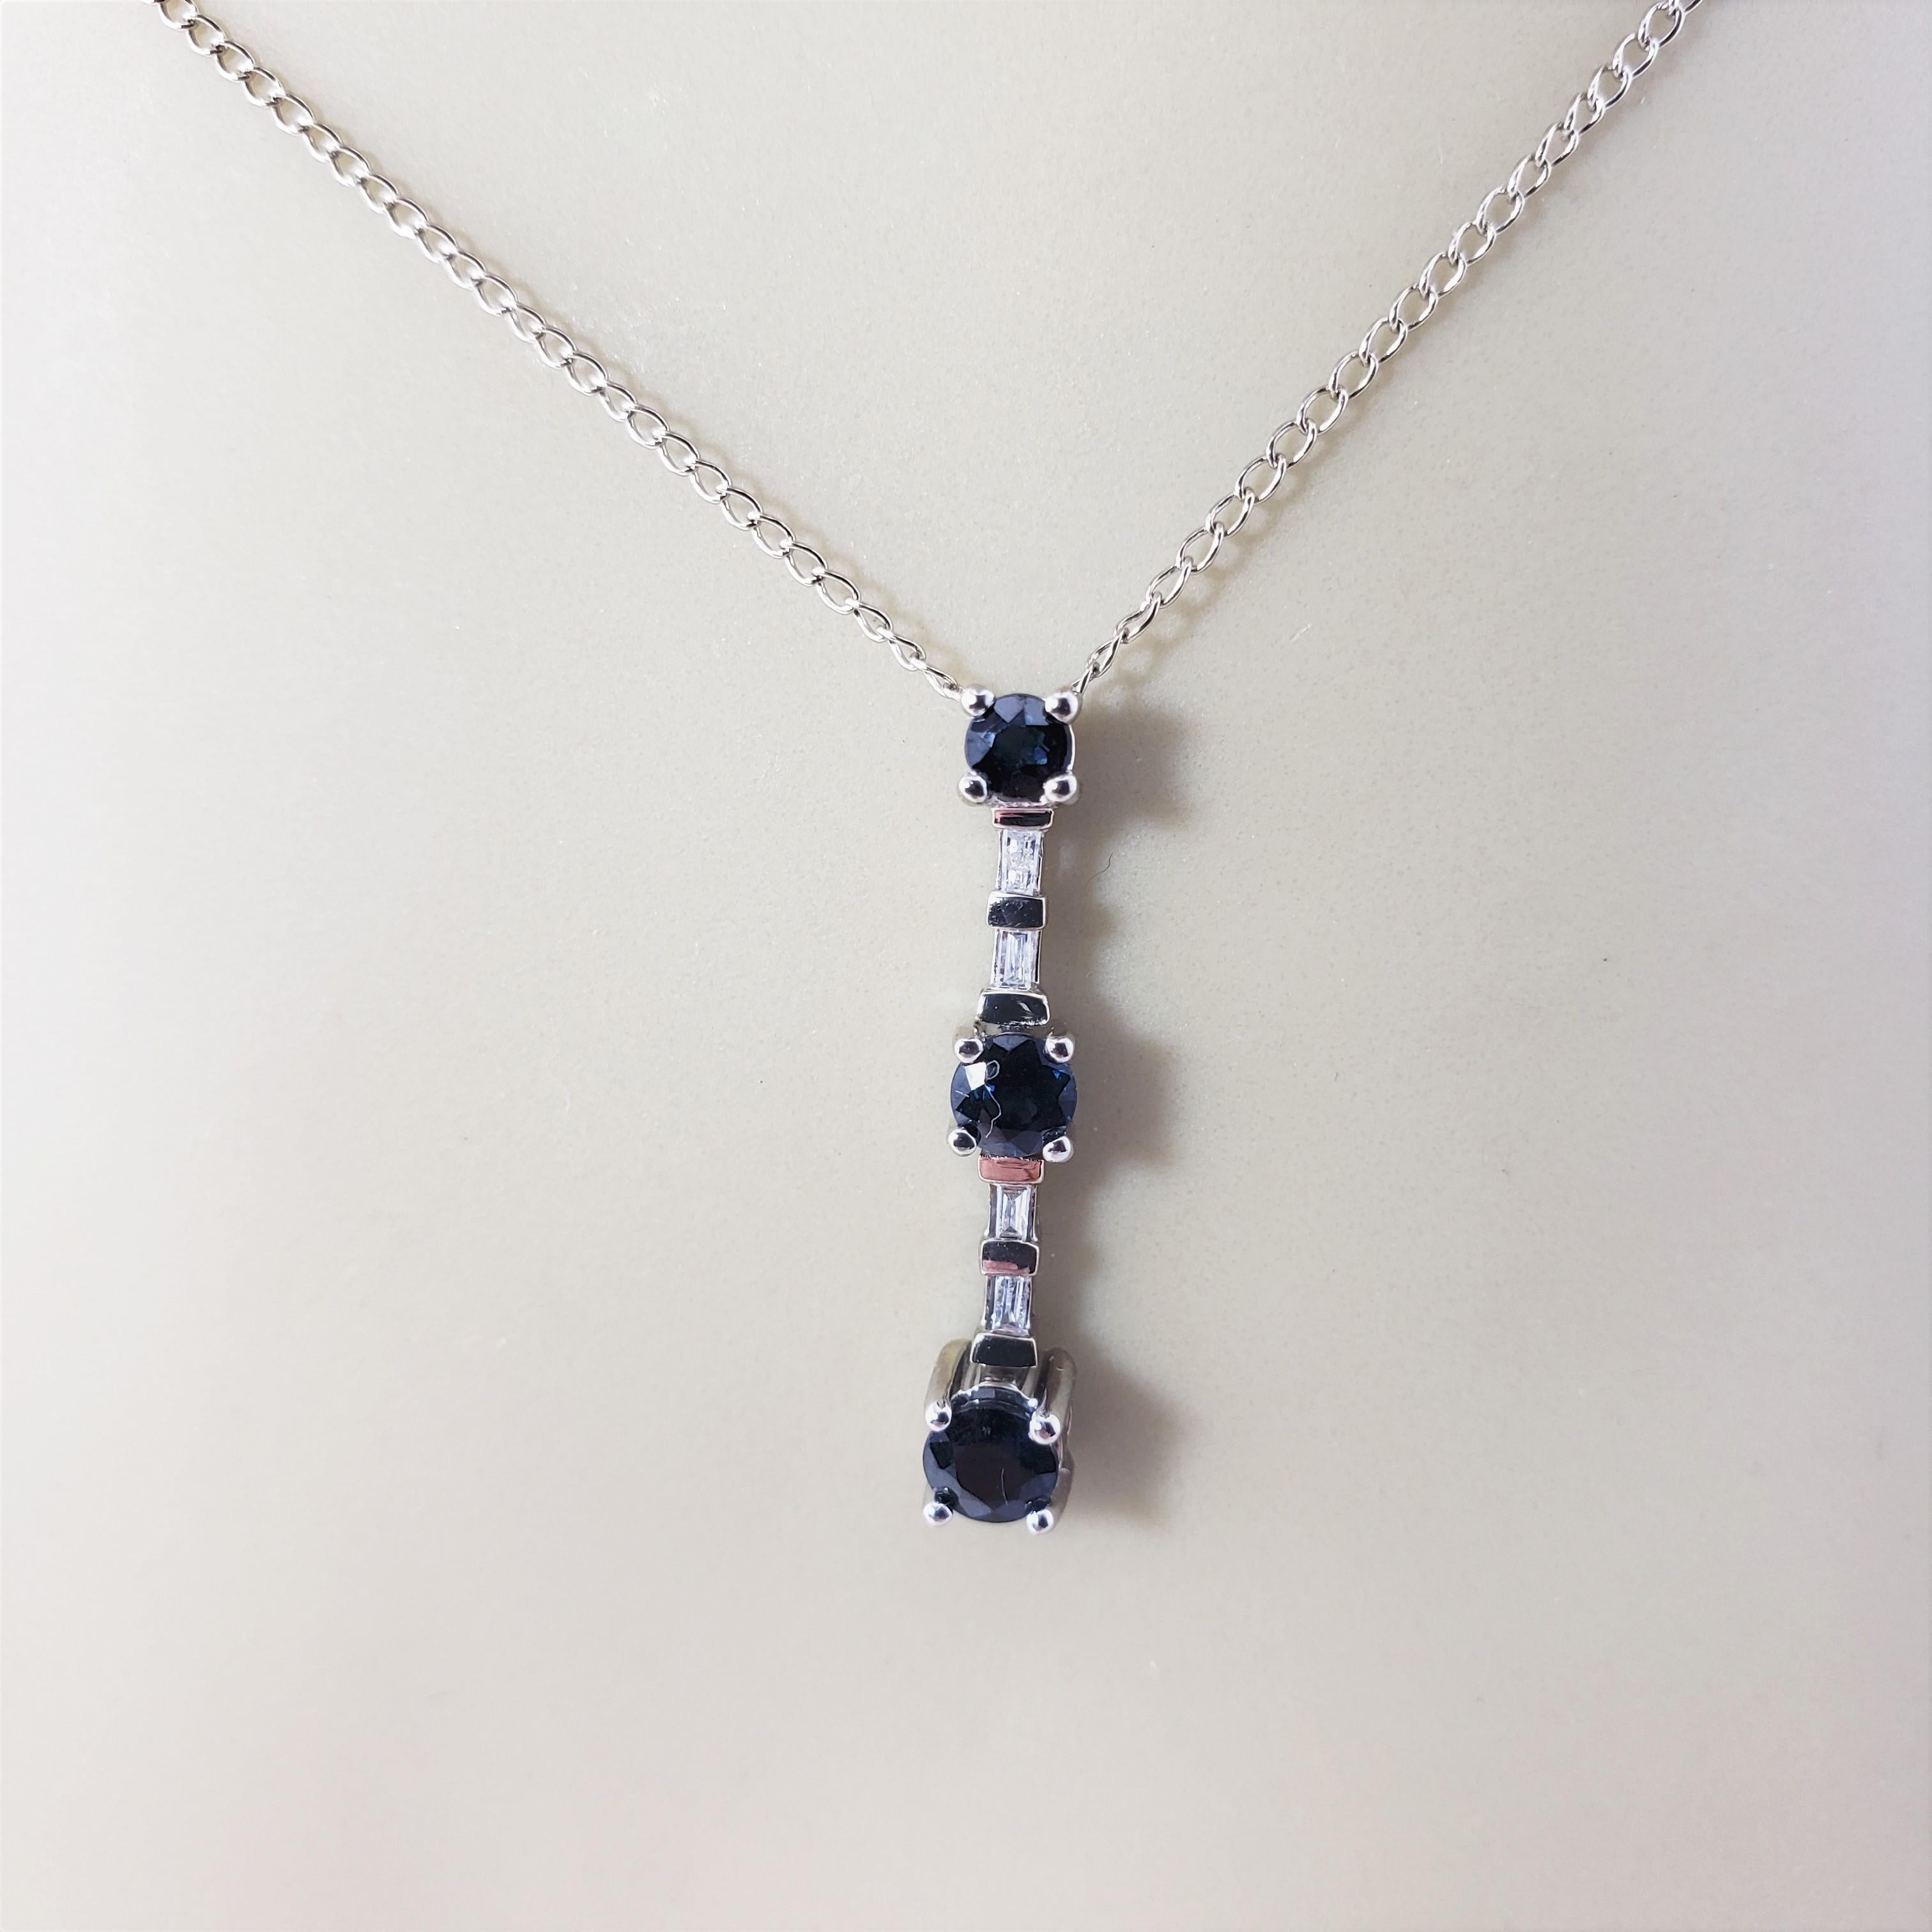 14 Karat White Gold Natural Sapphire and Diamond Pendant Necklace For Sale 3